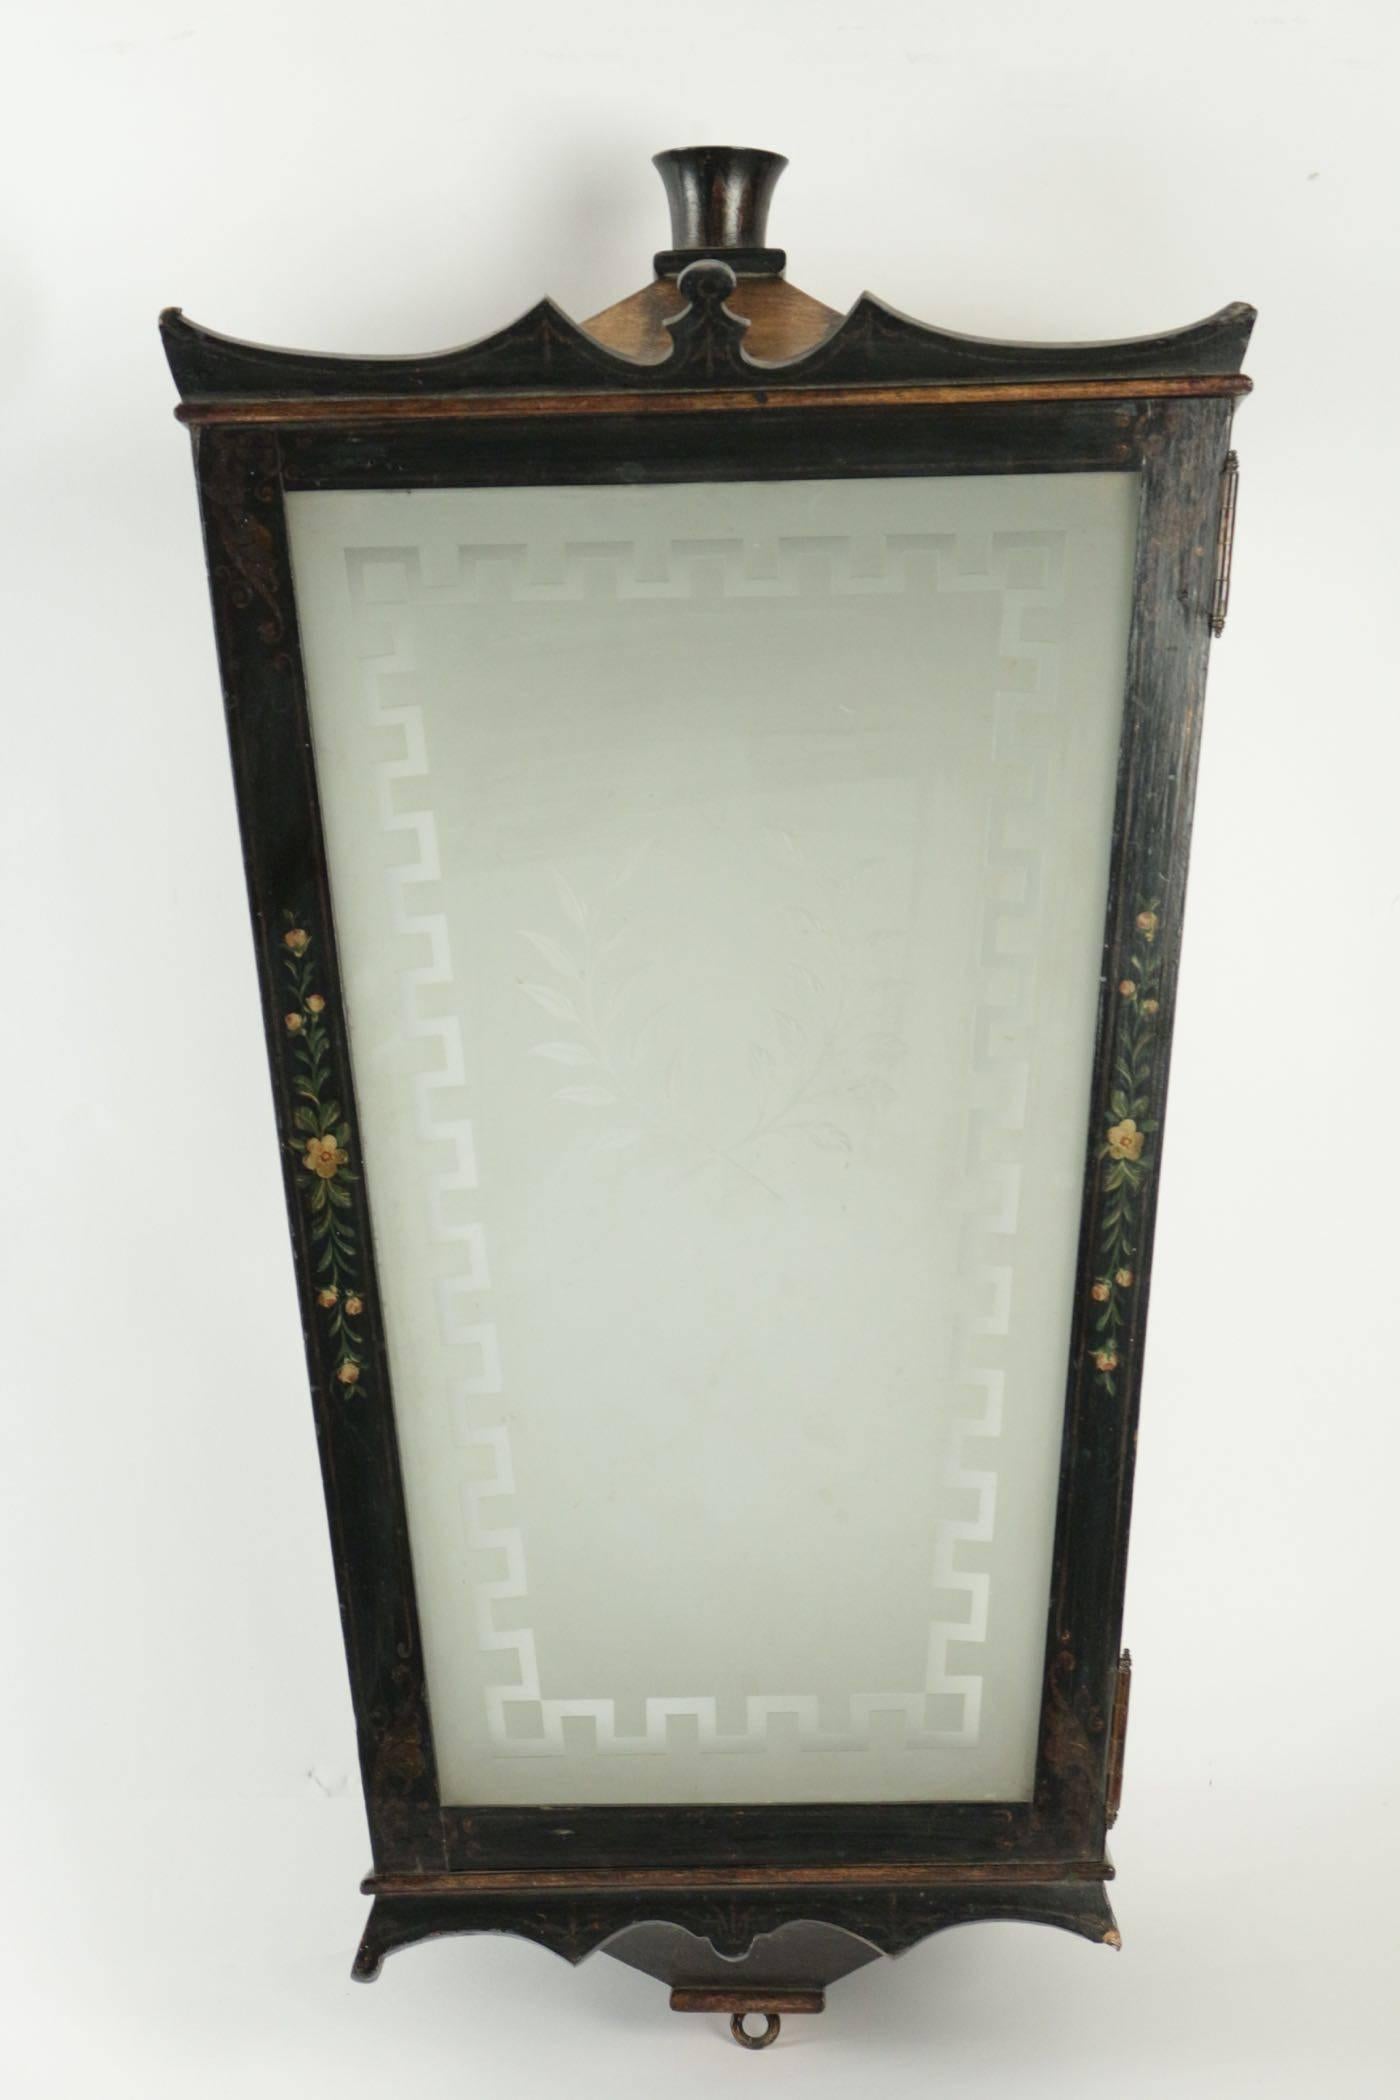 Painted wooden lantern, circa 1940 with etched glass.
Measures: H 80cm, L 40cm, P 30cm.
 